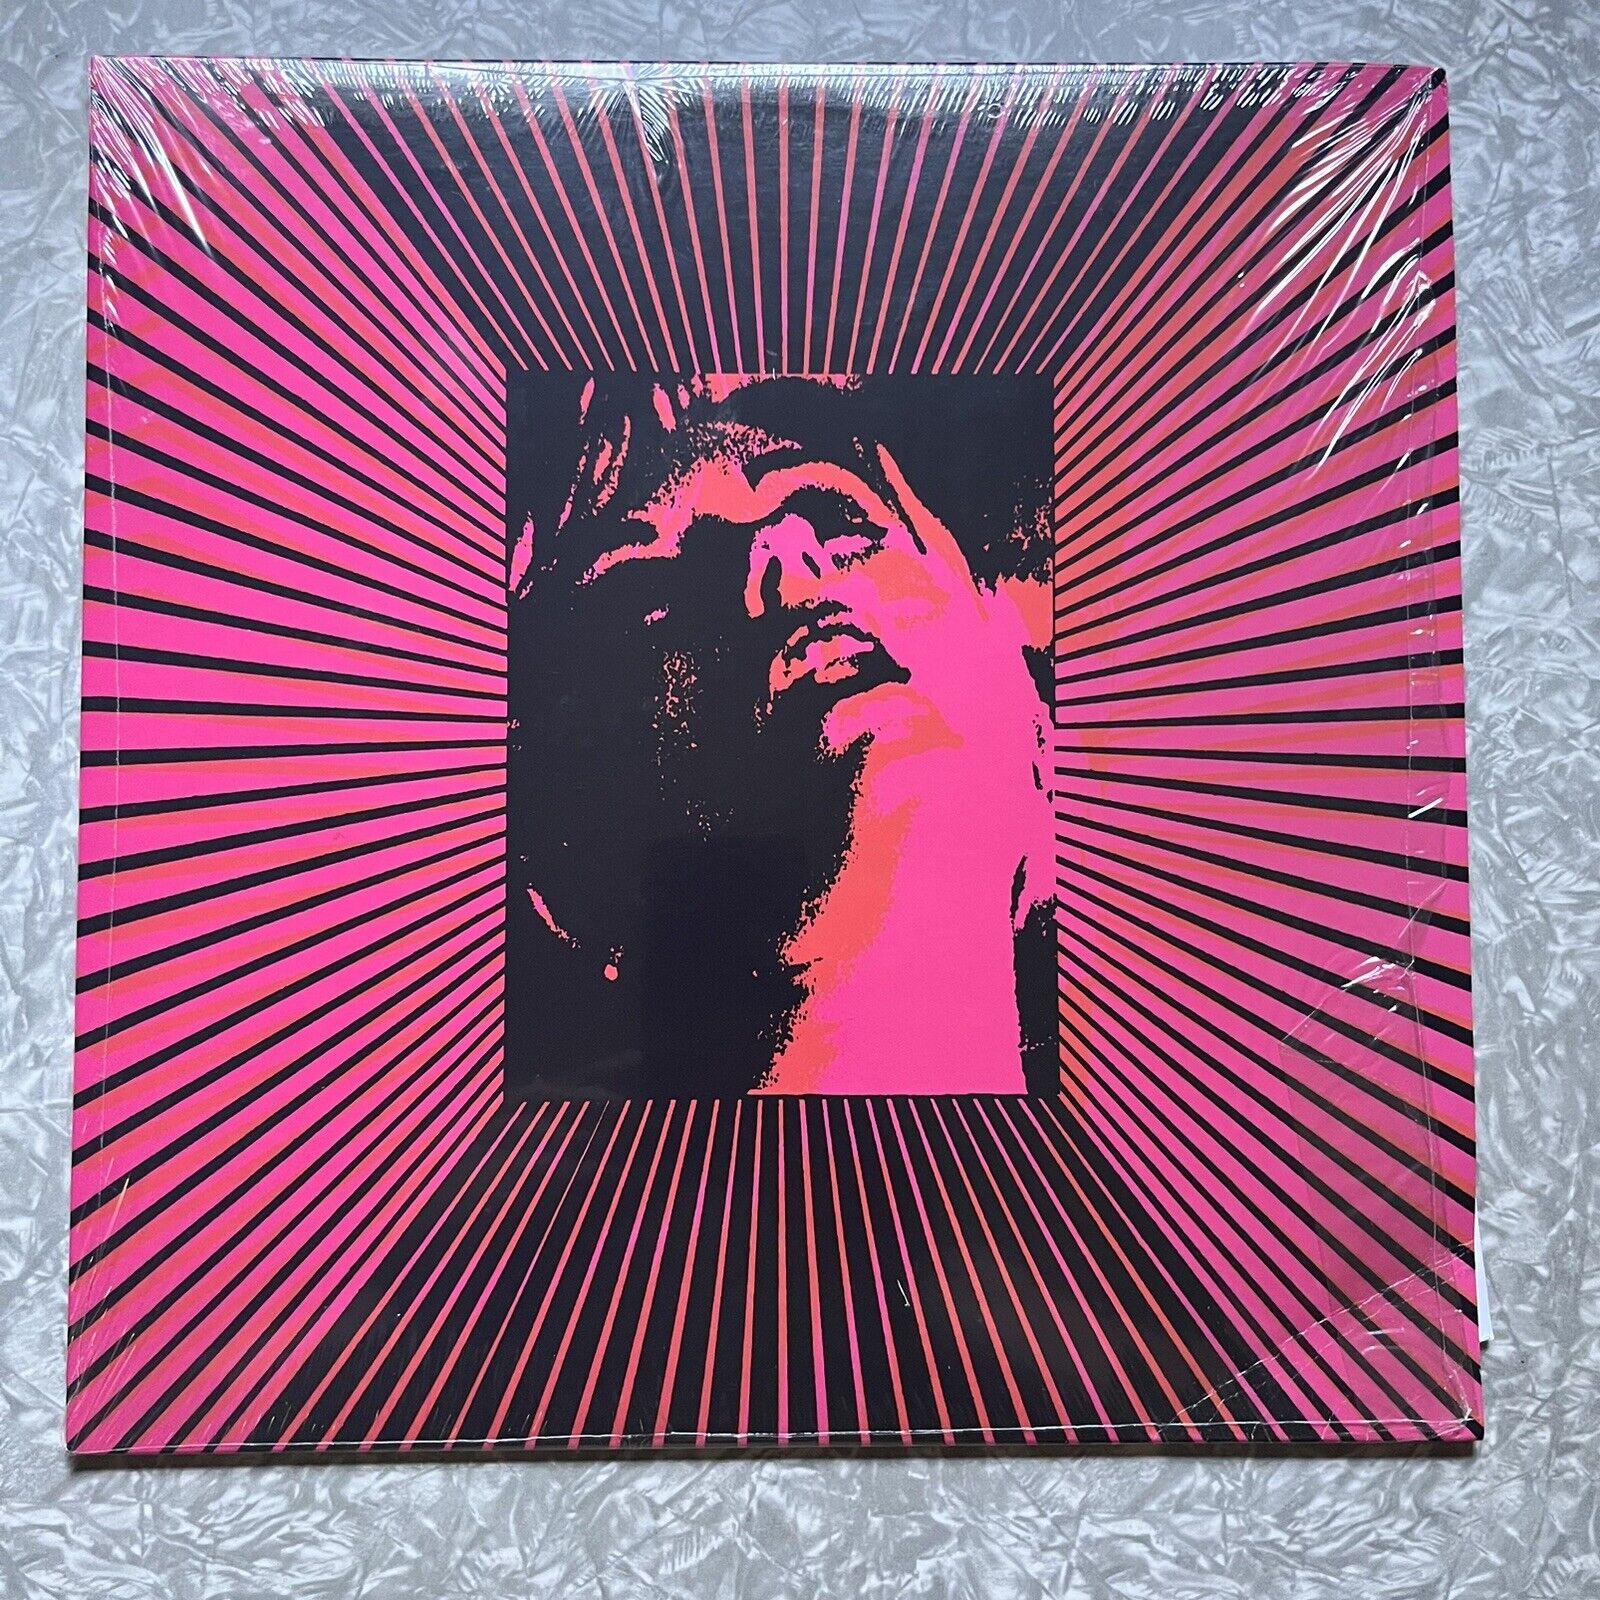 The Men: Immaculada (LP, 2010) Deranged Records: Limited to 300 Copies: NM